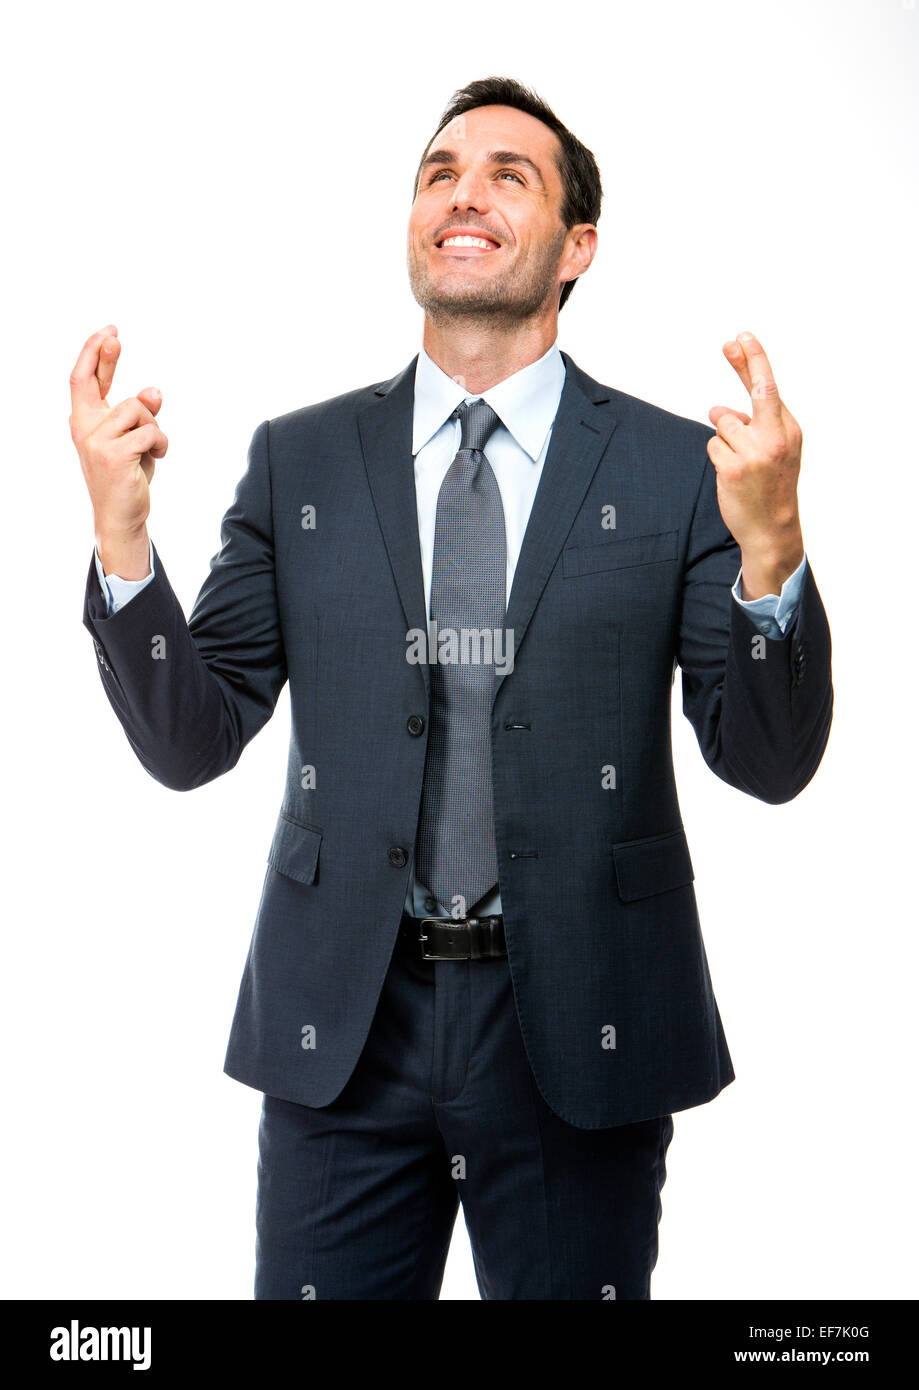 Half length portrait of a businessman smiling, looking above with his fingers crossed Stock Photo